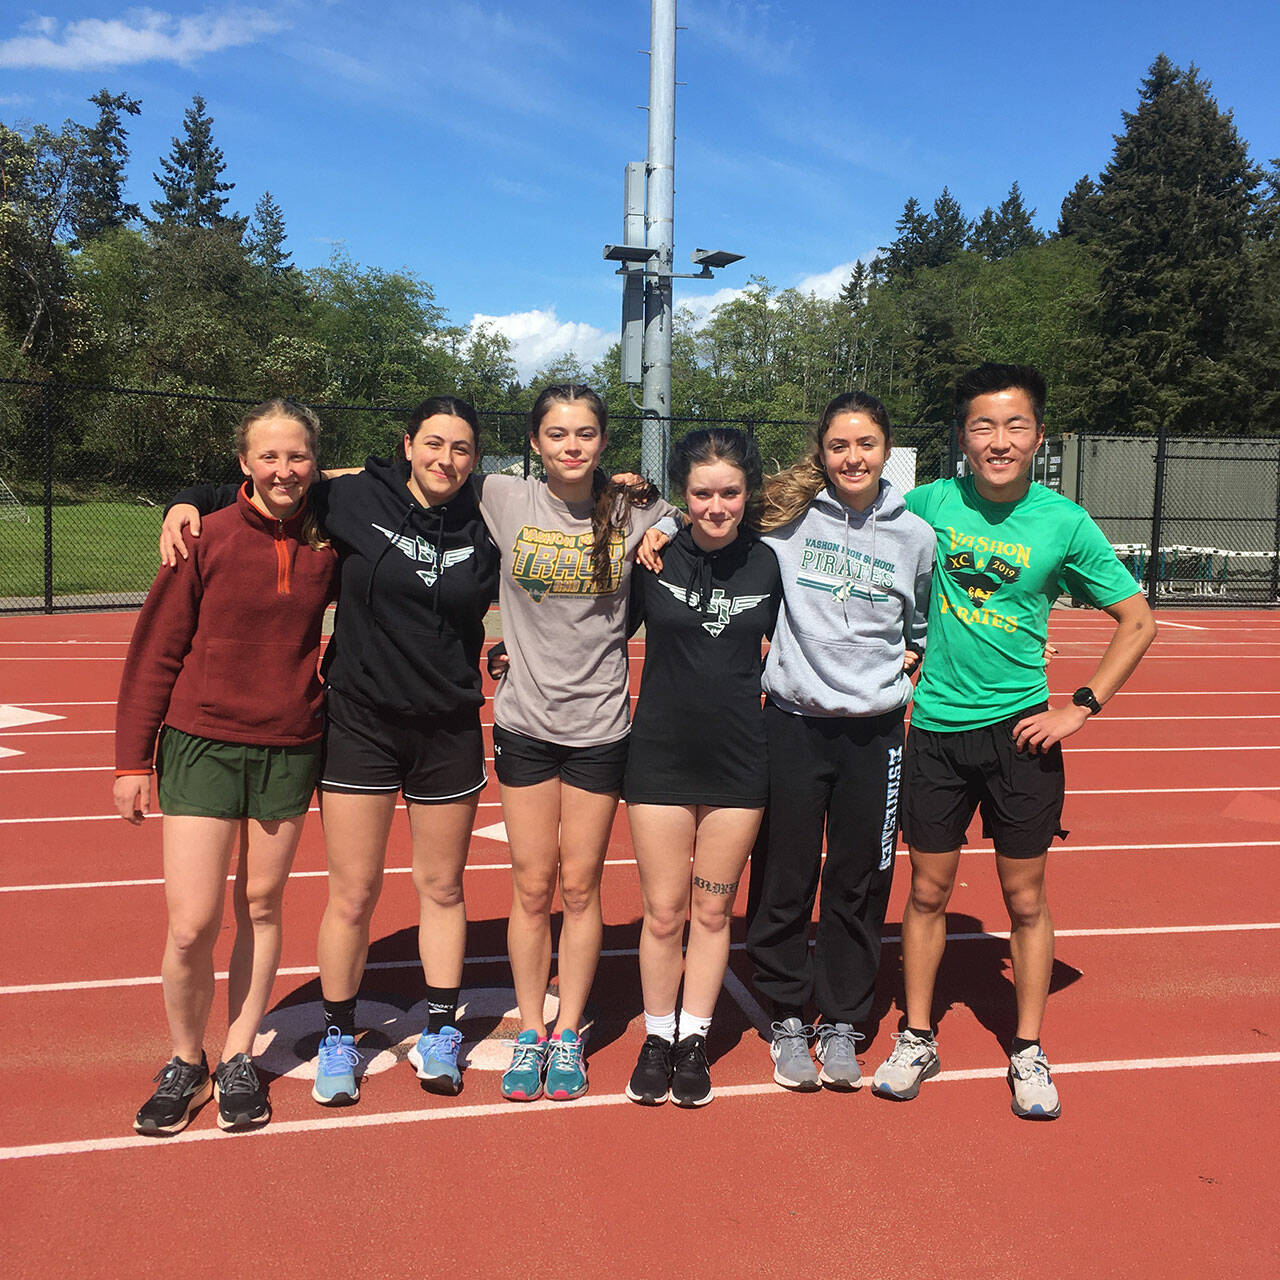 (Kevin Ross Photo) The 2022 team captains for VHS track field season, pictured from left to right are, Madeline Yarkin, Amelia Medeiros, Alana Bass, Phoebe Wilke, Nicki Becker, and Levi Blasingim. Not pictured, George Murphy.